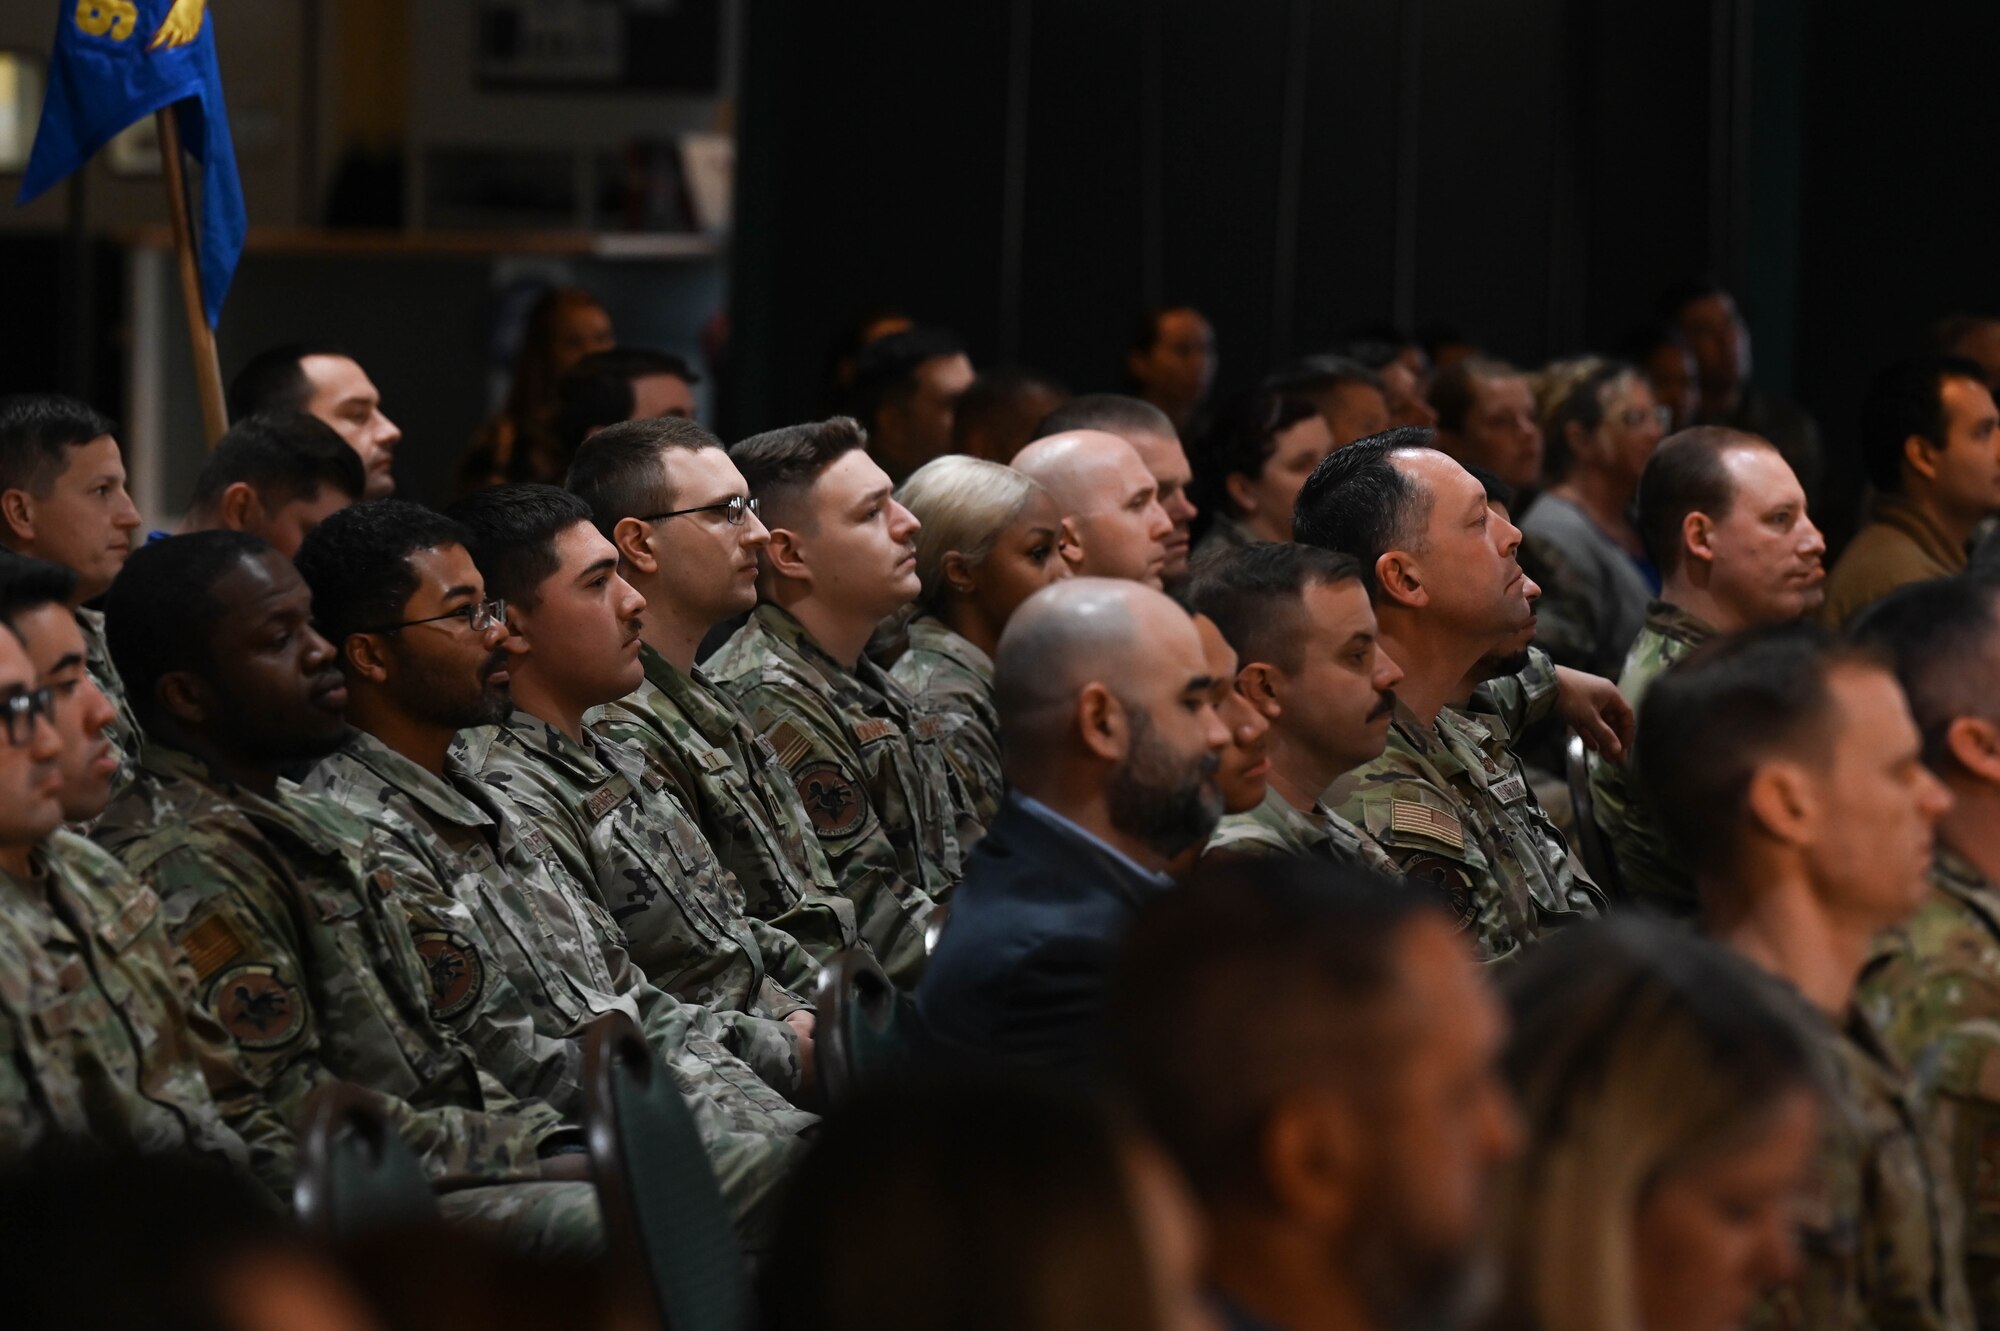 Members from the 87th Electronic Warfare Squadron attend the Airman Leadership School Class 24-Alpha graduation at Eglin Air Force Base, Fla., Dec. 7, 2023. The 87th EWS was there in support of one of their members who was graduating the school that evening. (U.S. Air Force photo by Capt. Benjamin Aronson)